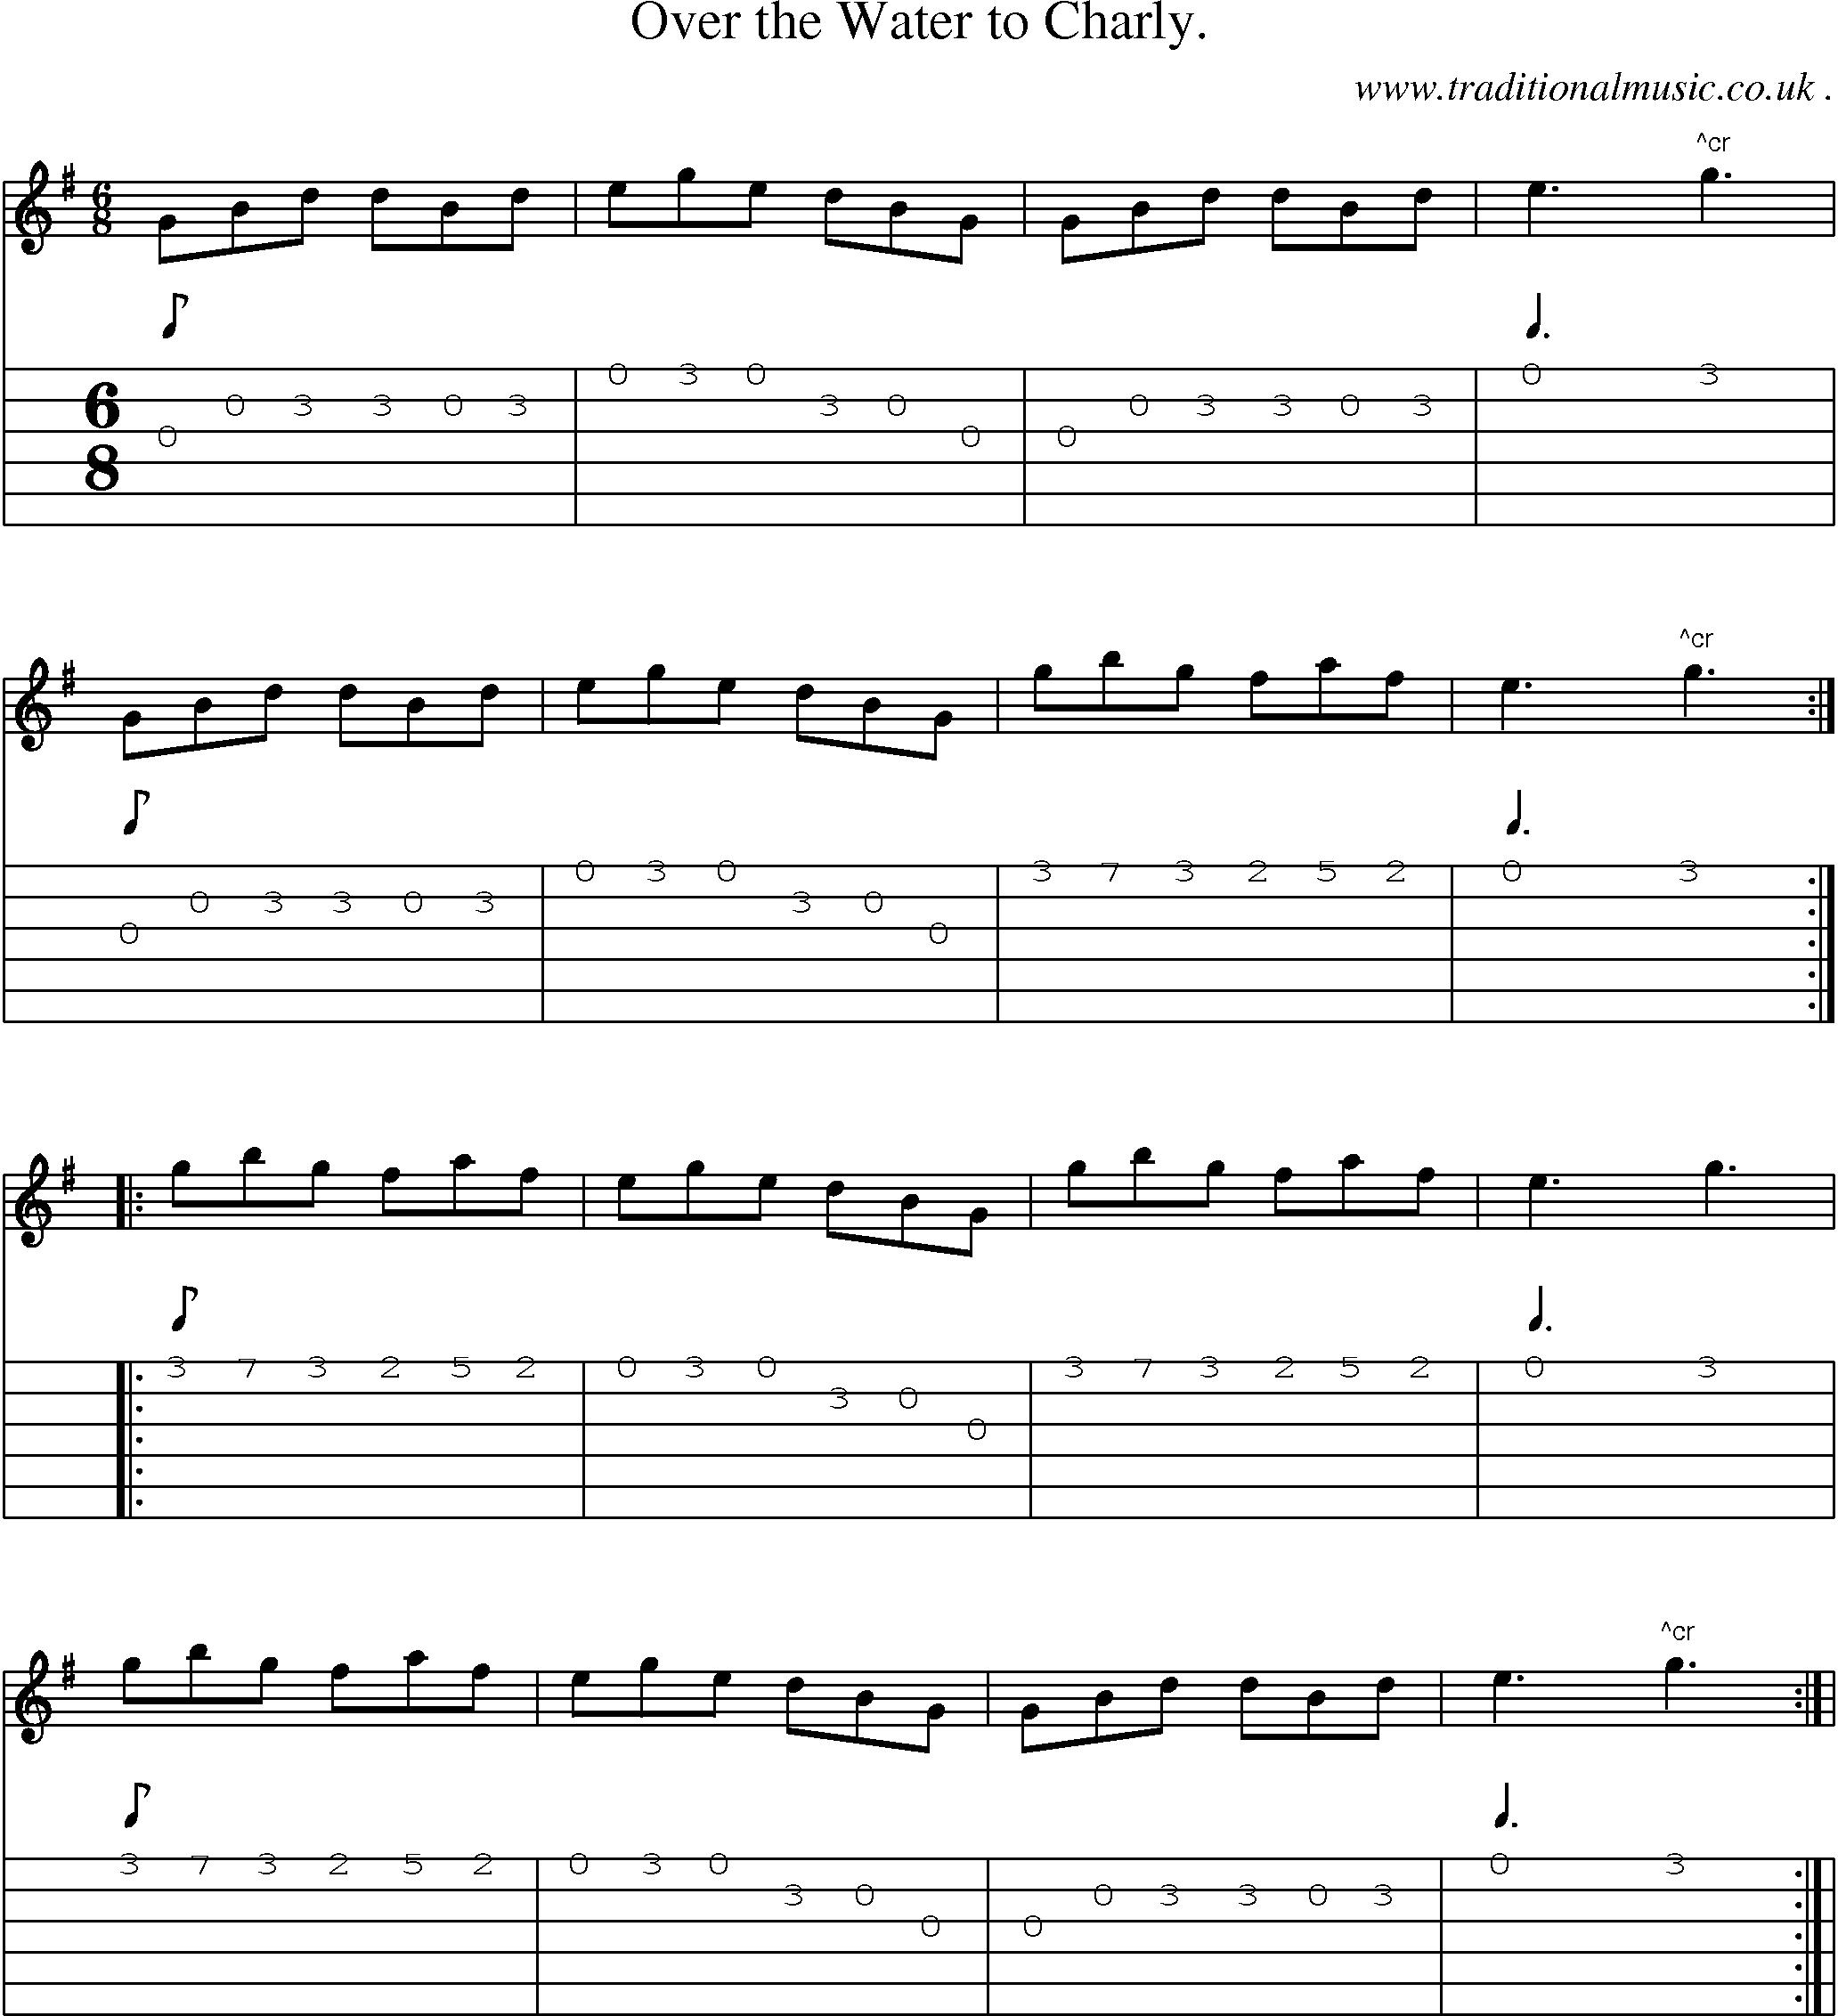 Sheet-Music and Guitar Tabs for Over The Water To Charly